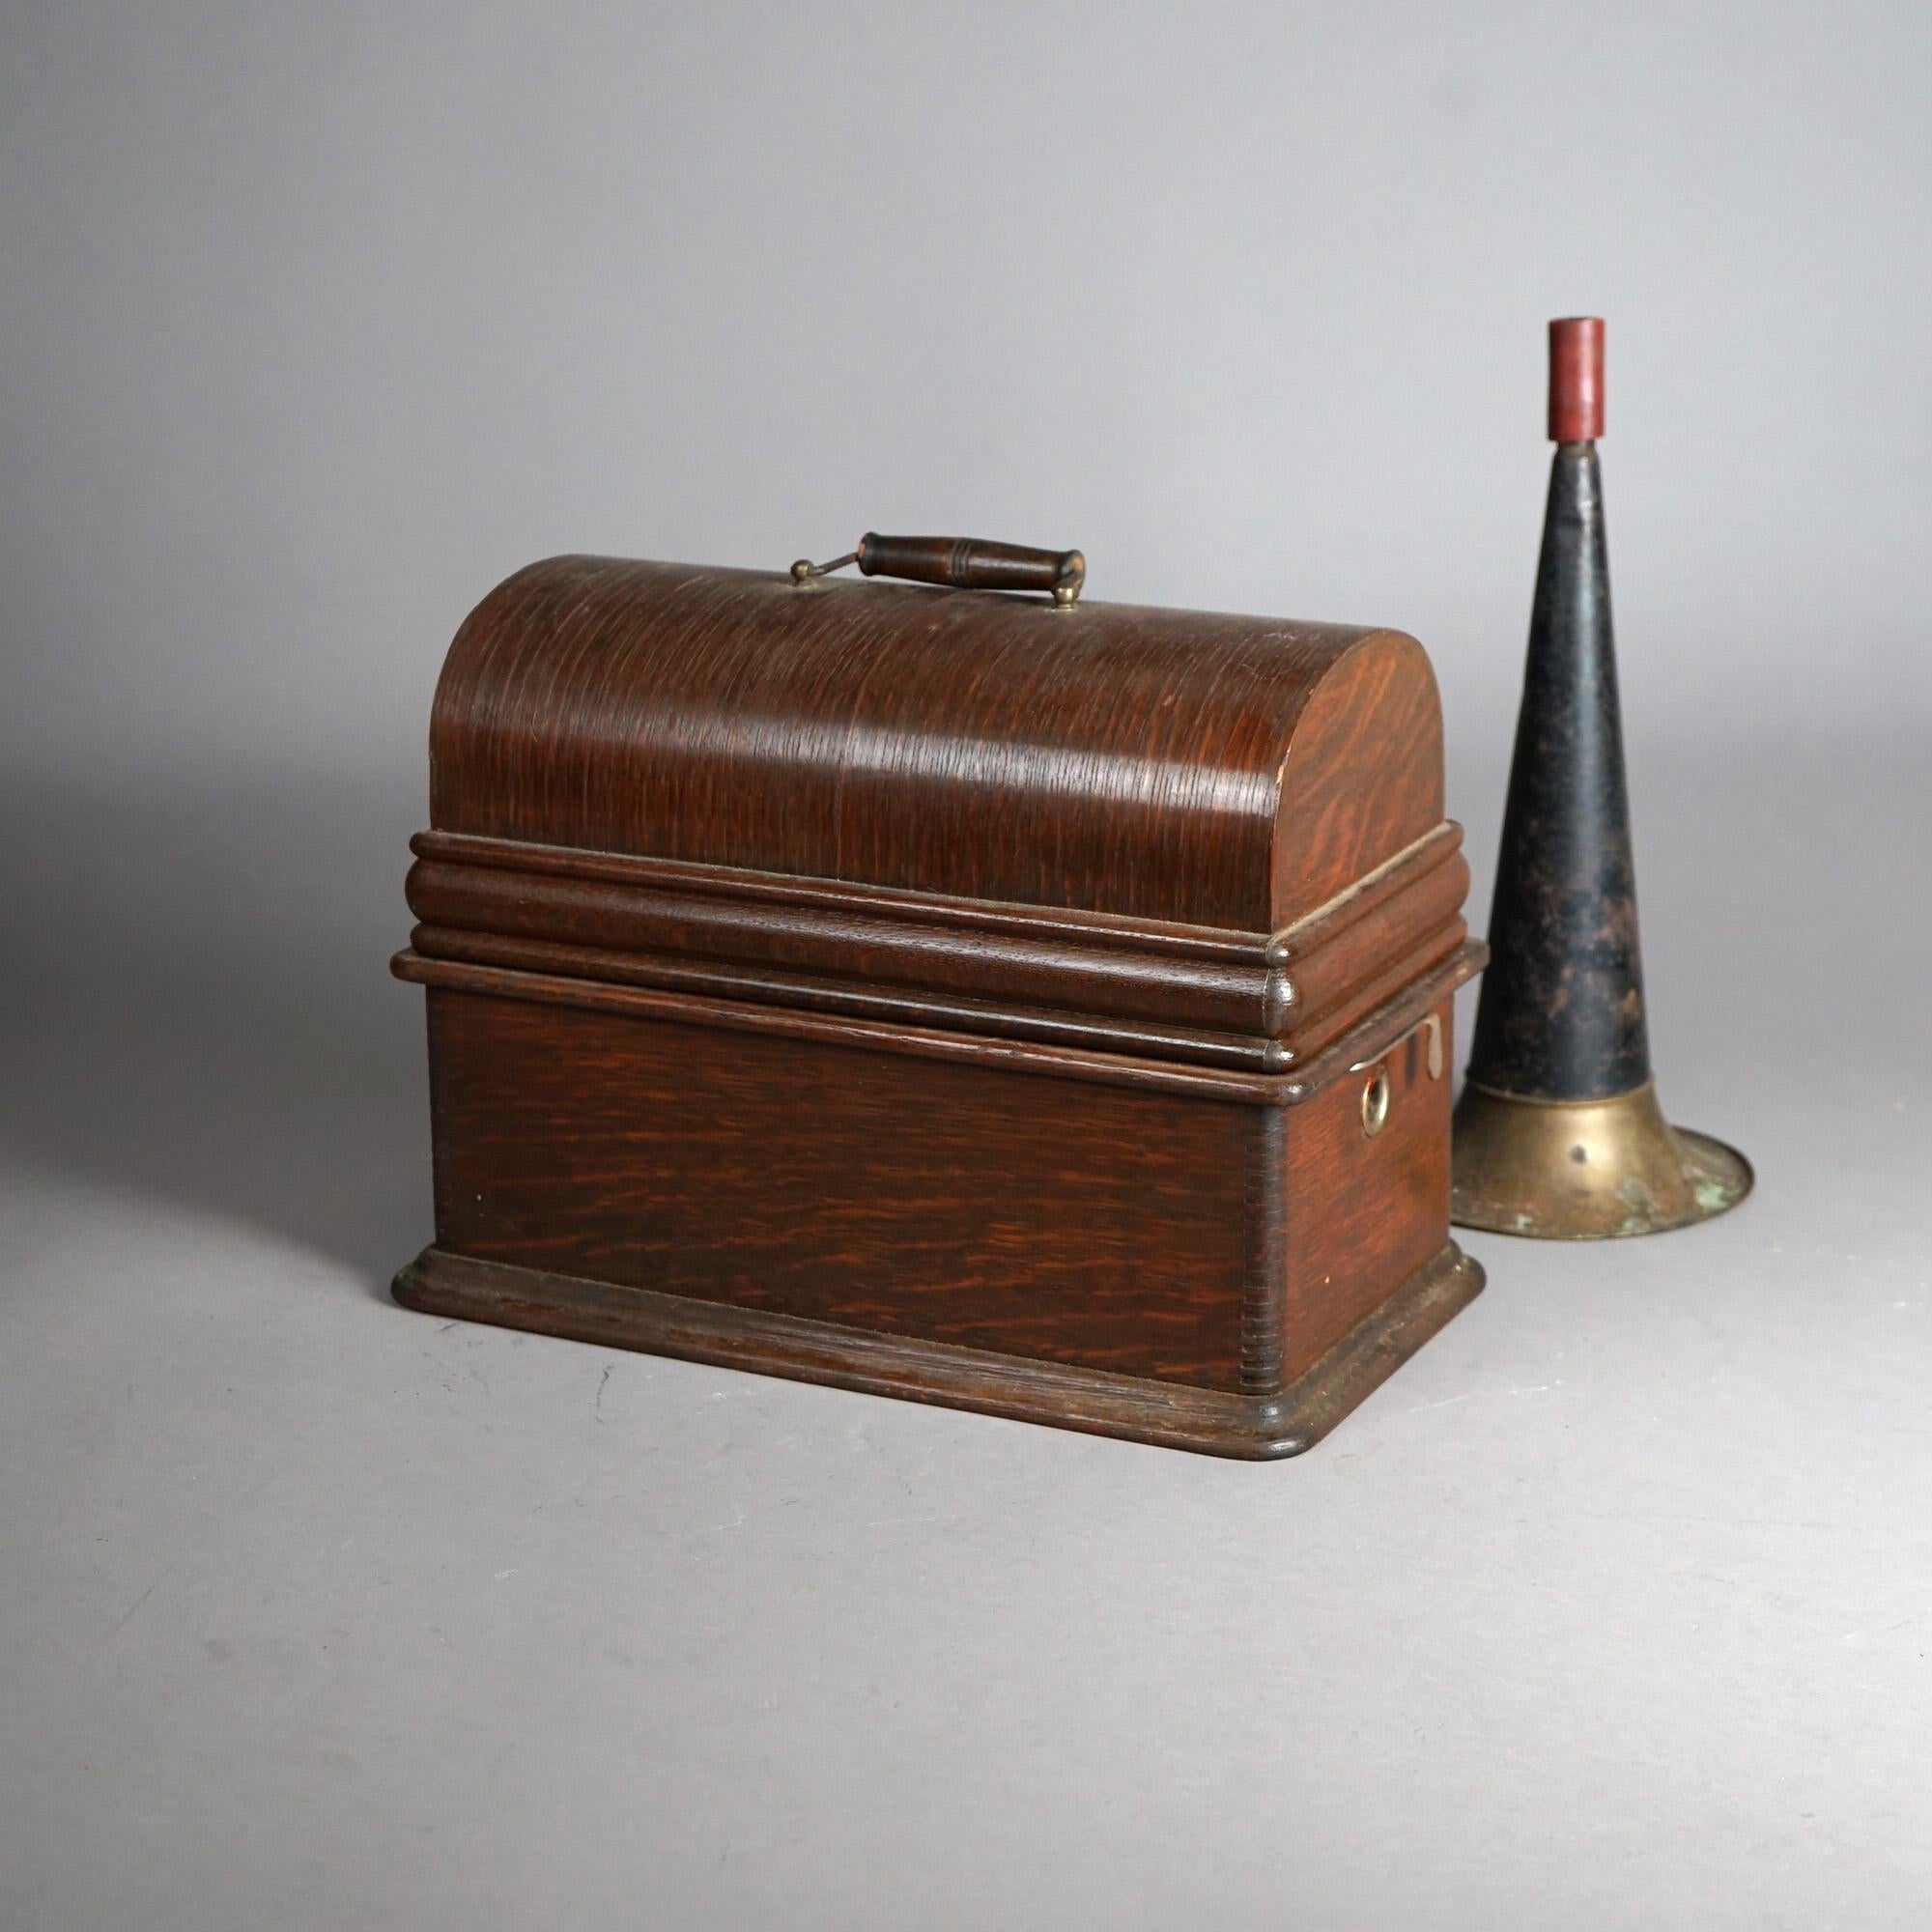 An Antique Edison Cylinder Phonograph with Cygnet Horn C1910

Measures- 13''H x 16.25''W x 9''D

Catalogue Note: Ask about DISCOUNTED DELIVERY RATES available to most regions within 1,500 miles of New York.
